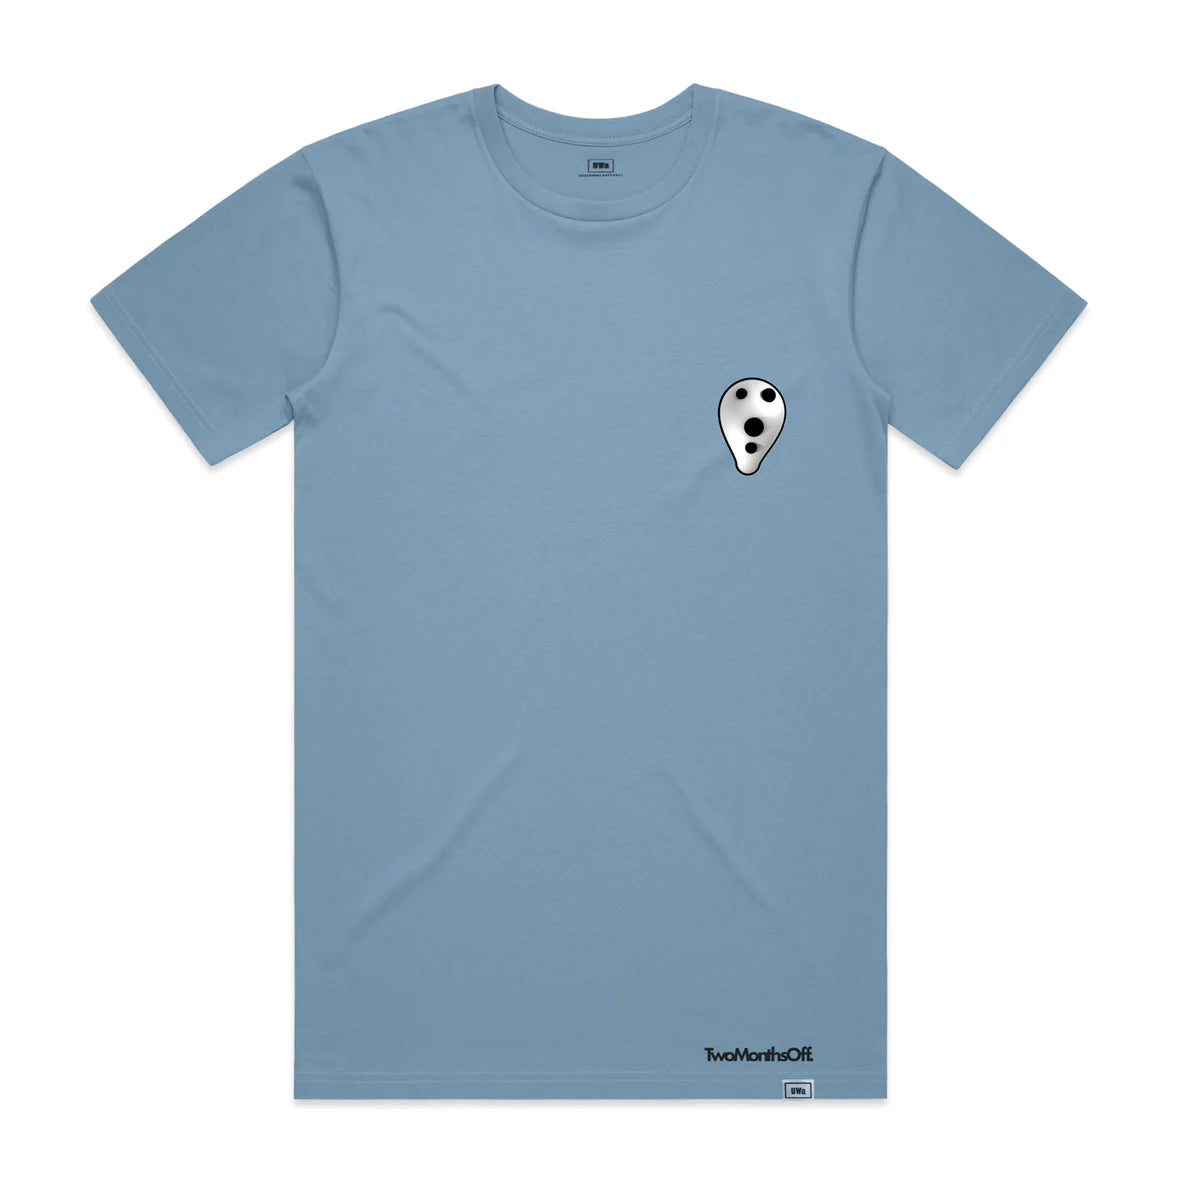 Underworld - *Two Months Off Limited Drop* Two Months Off Blue Tee Shirt